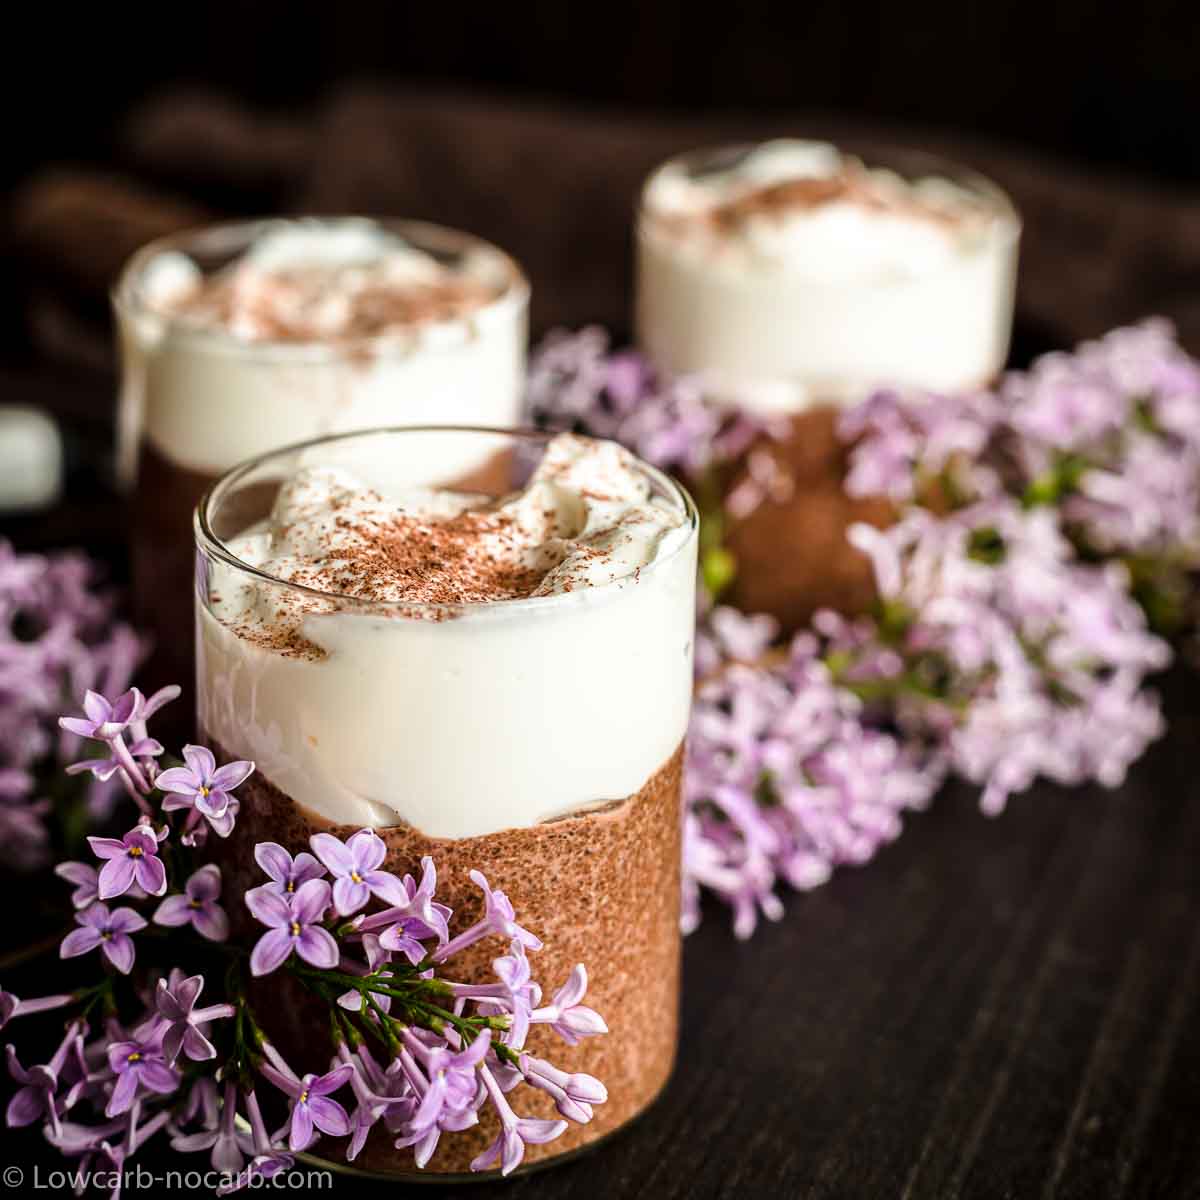 Chocolate Pudding made from Chia seeds and with purple flowers around it